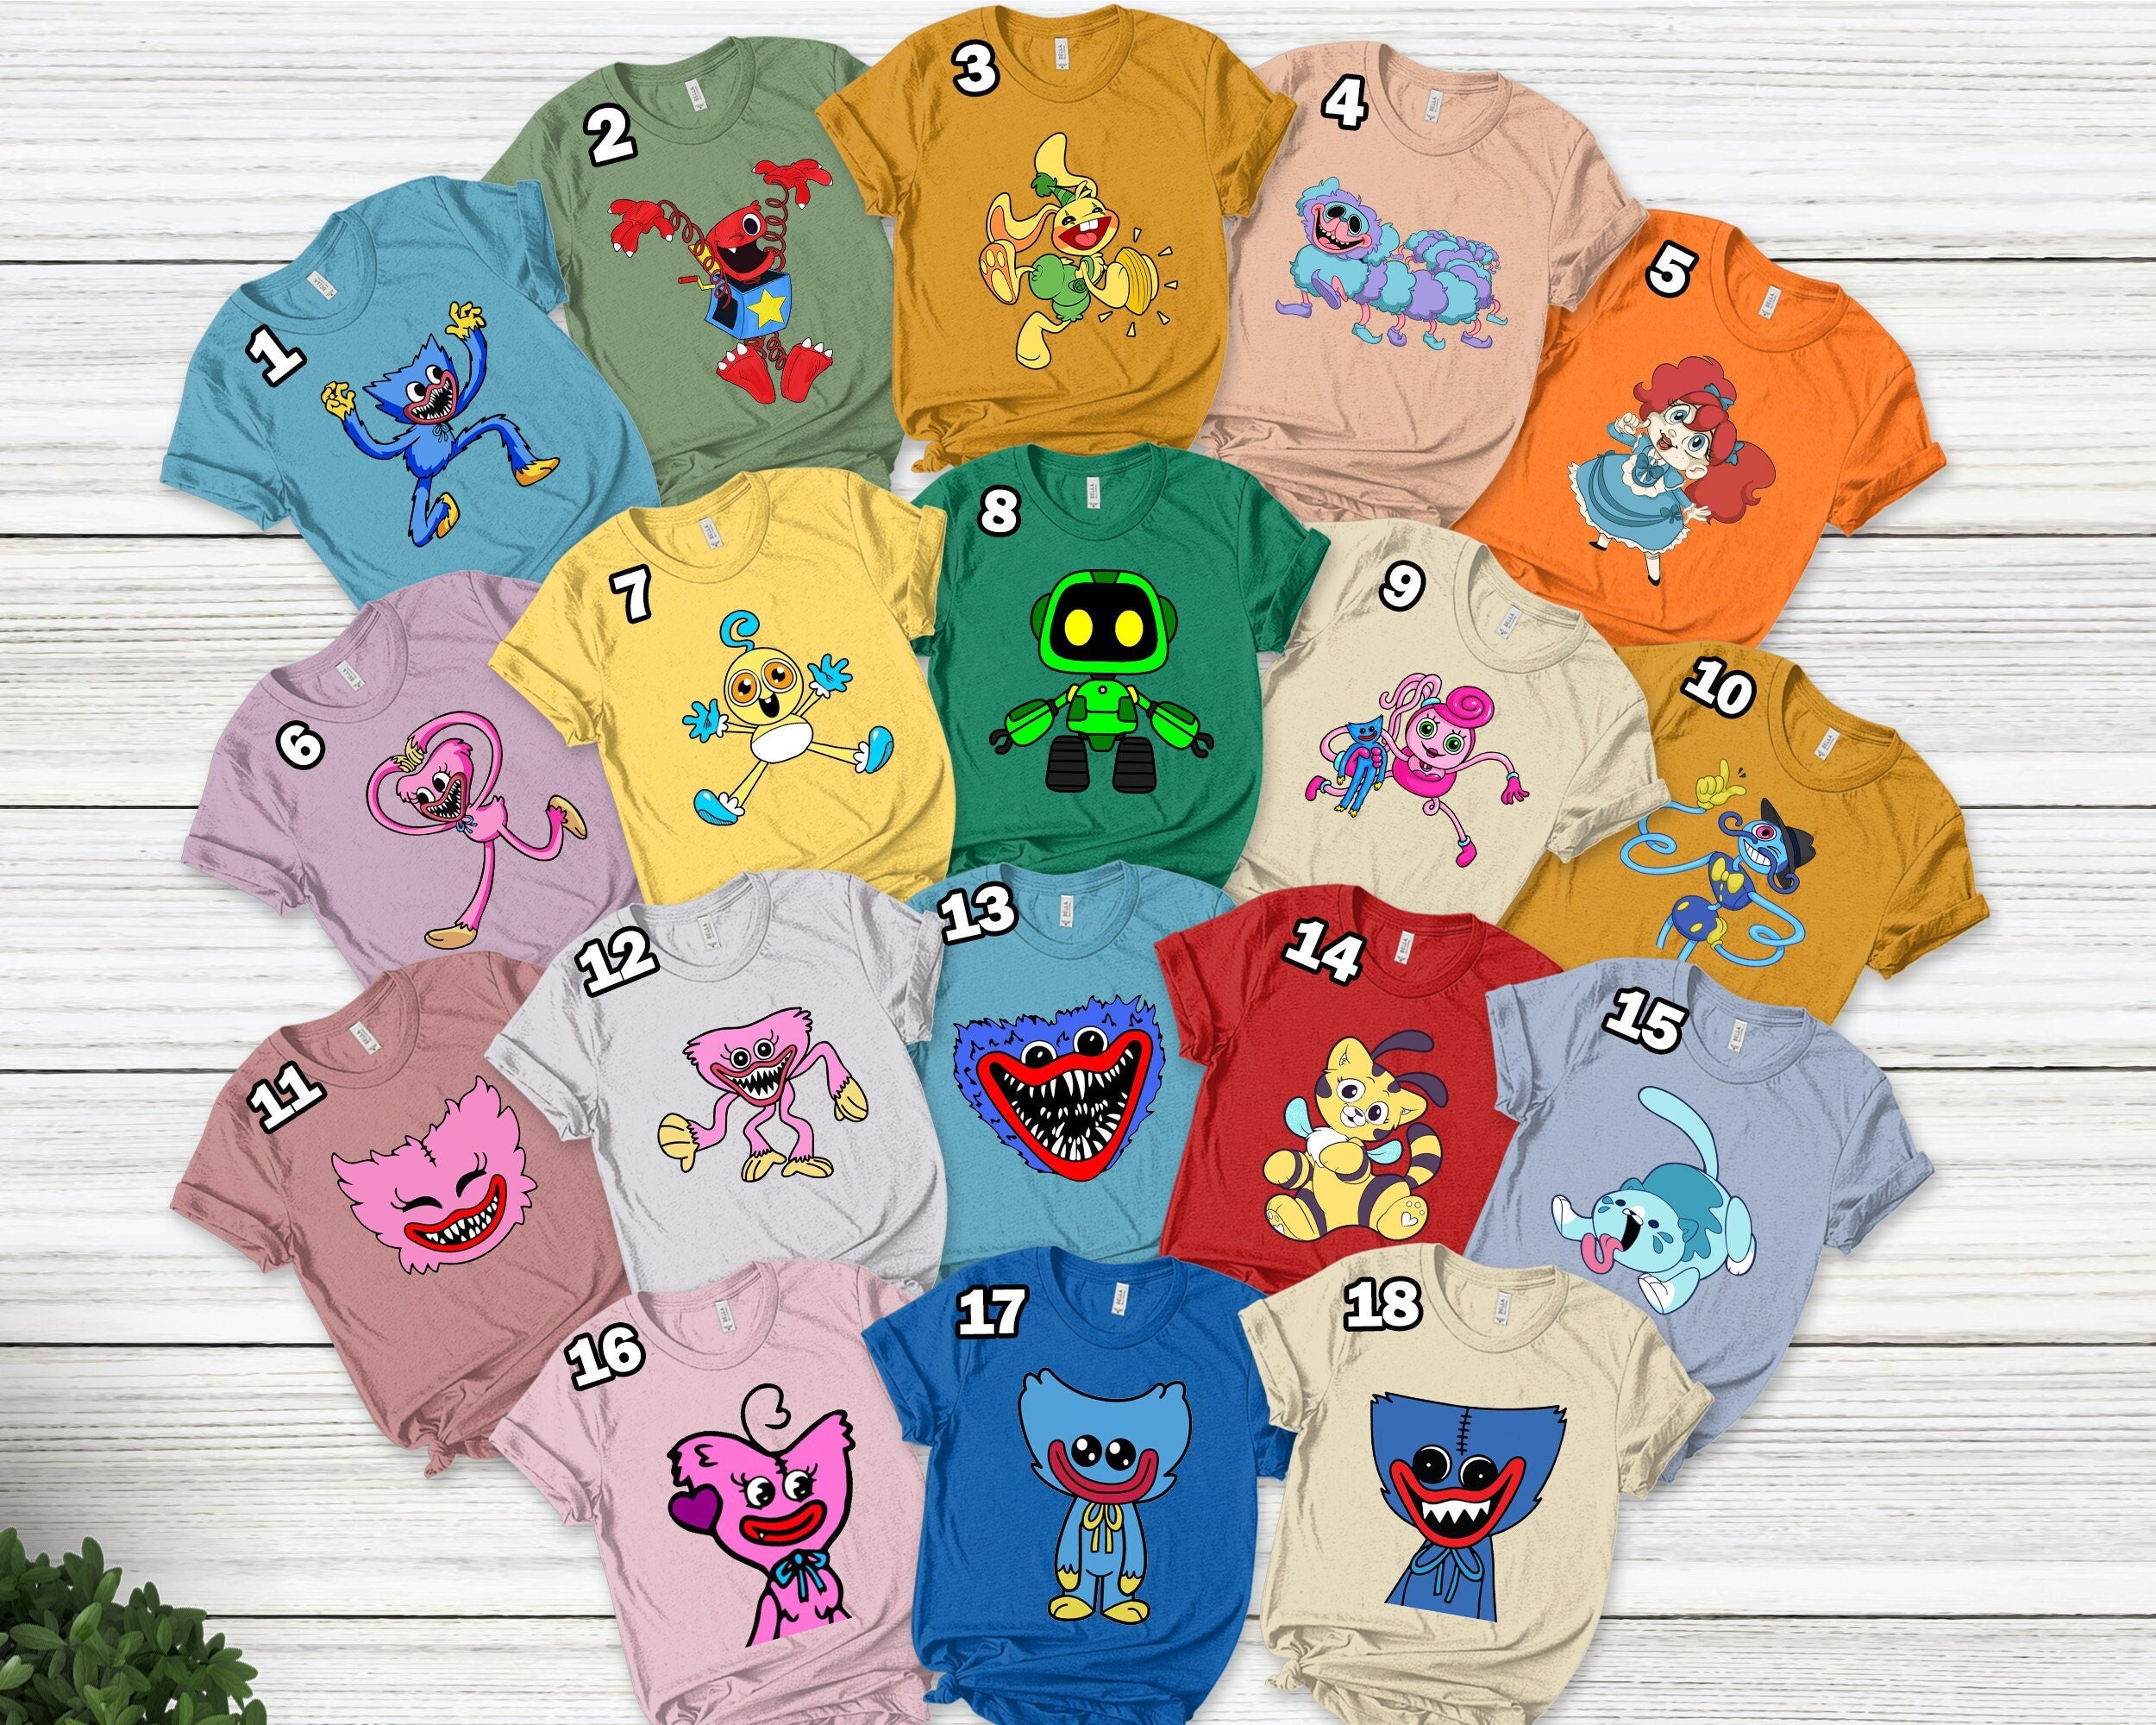 Poppy Playtime Logo Shirt, Huggy Wuggy And Kissy Missy Shirt sold by Amalea  Disgusted, SKU 38338180